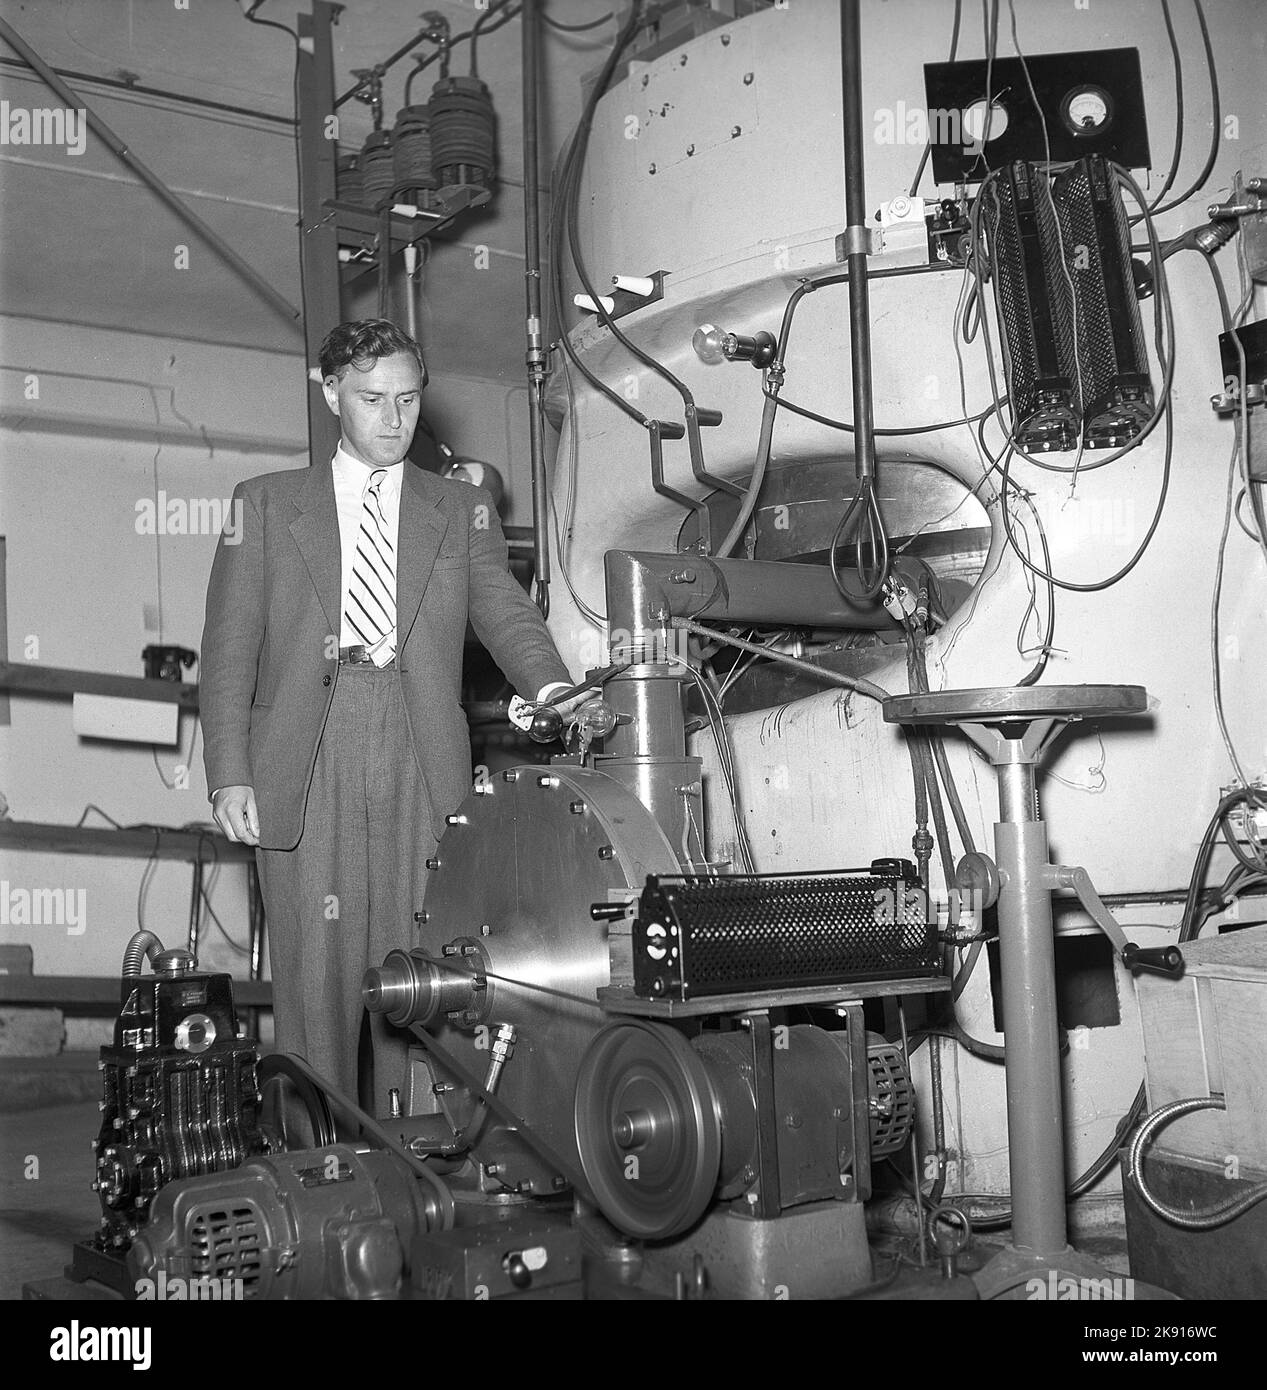 Man and machine in the 1940s. A man is seen in a room with a unusual construction of unknown purpose. Picture taken at KTH Royal institute of Technology. Sweden 1945 Kristoffersson ref P47-5 Stock Photo